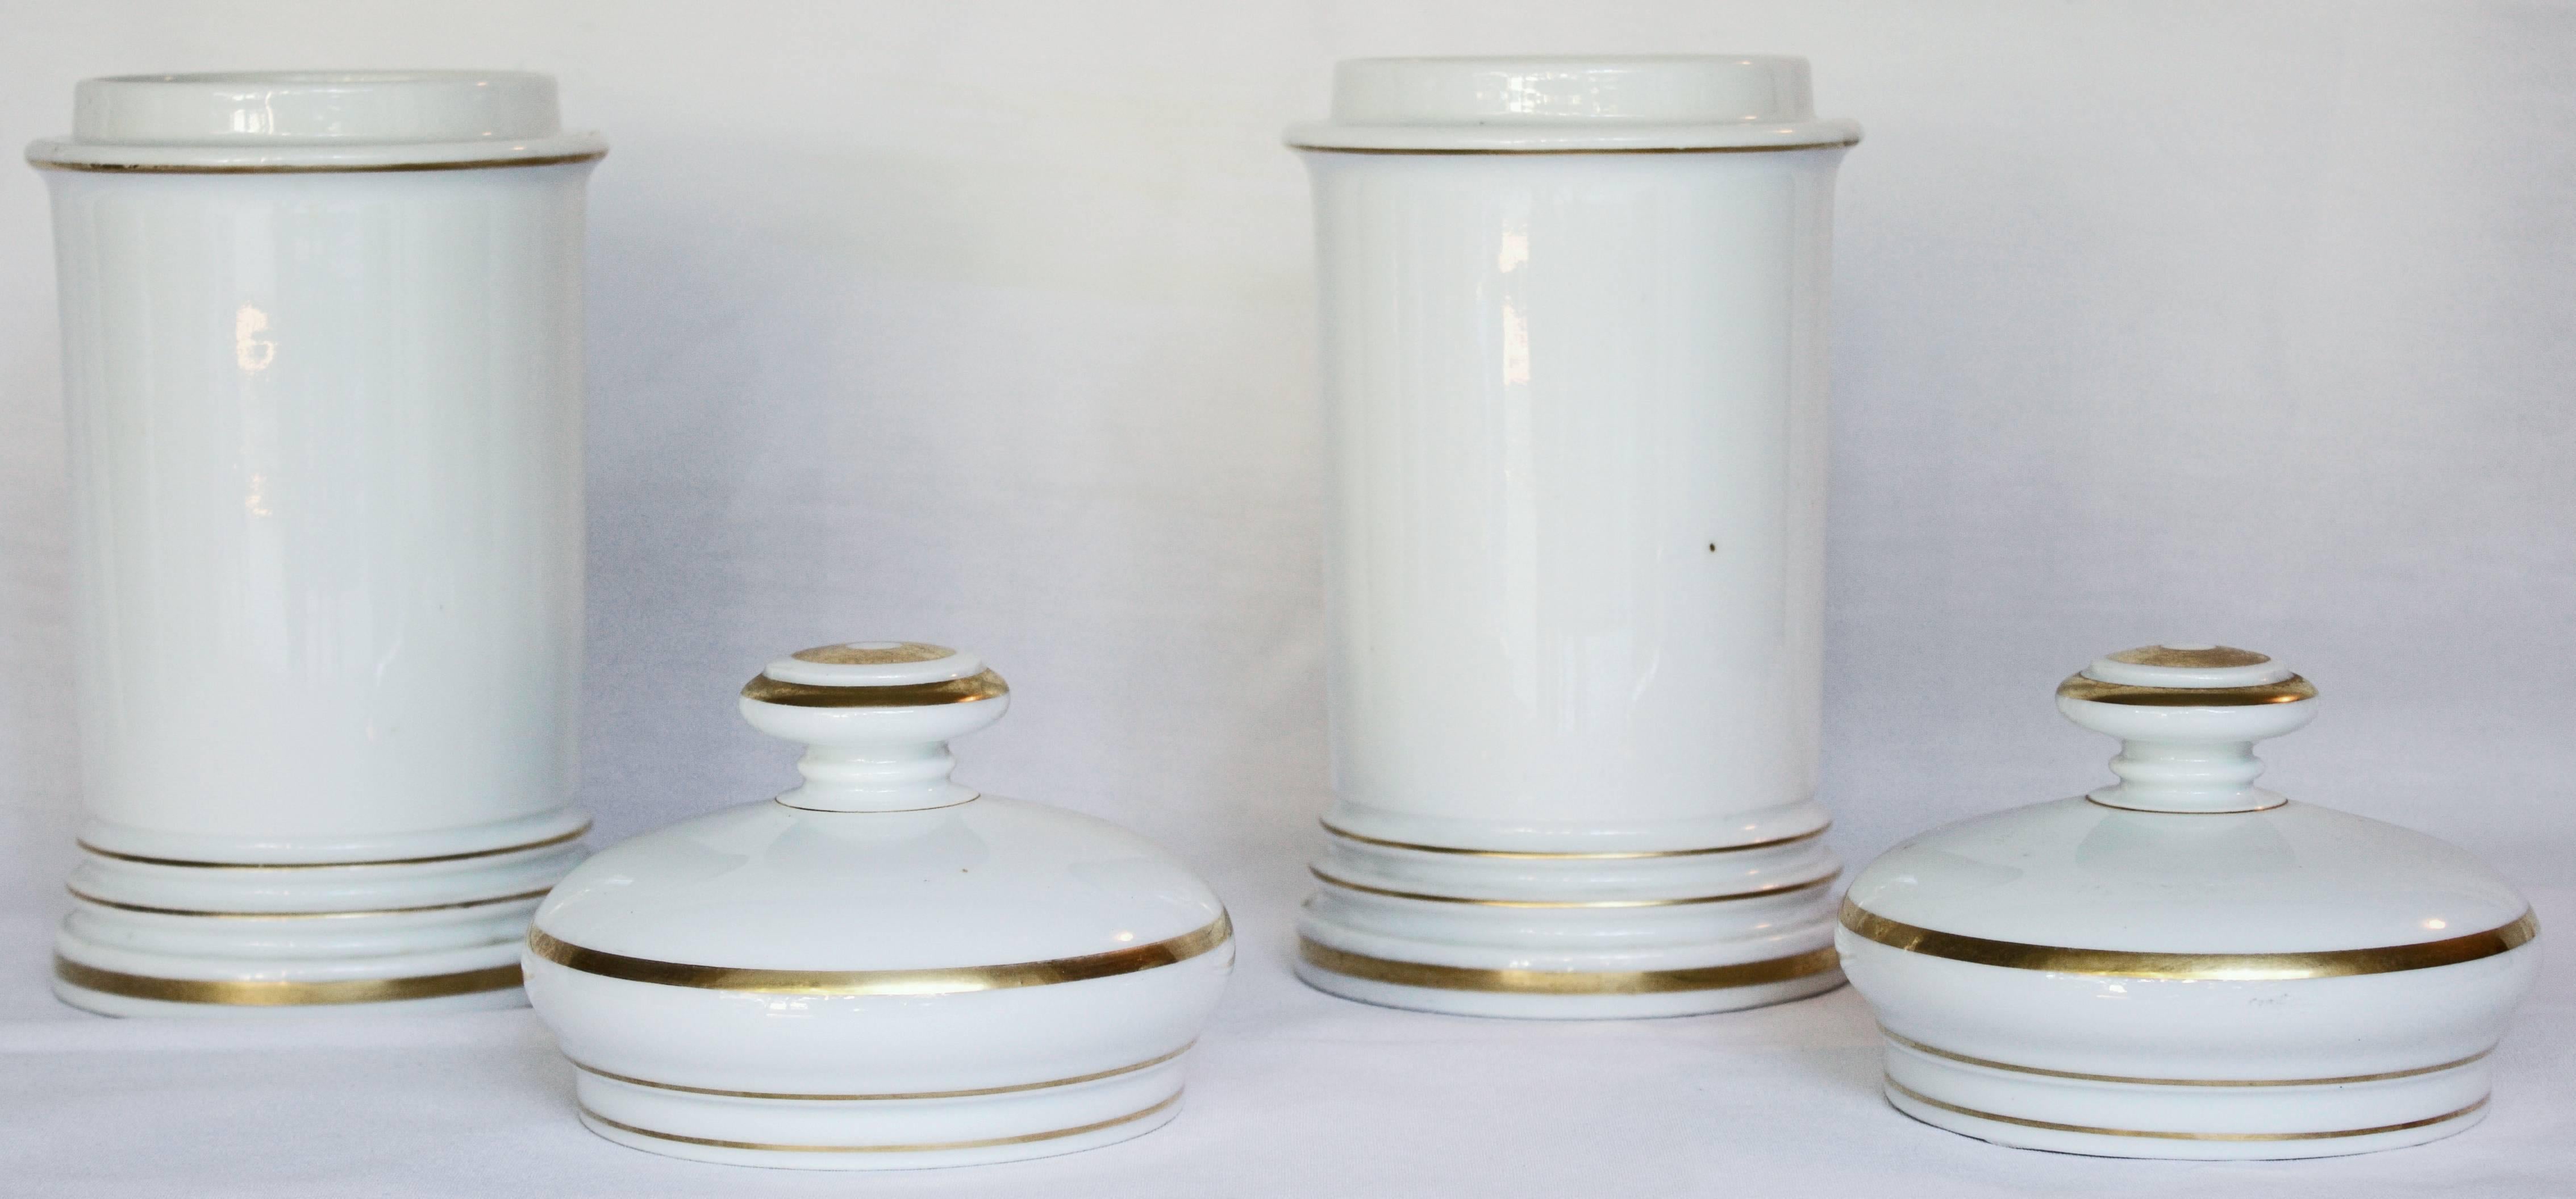 Other Pair of 19th Century Porcelain Apothecary Jars